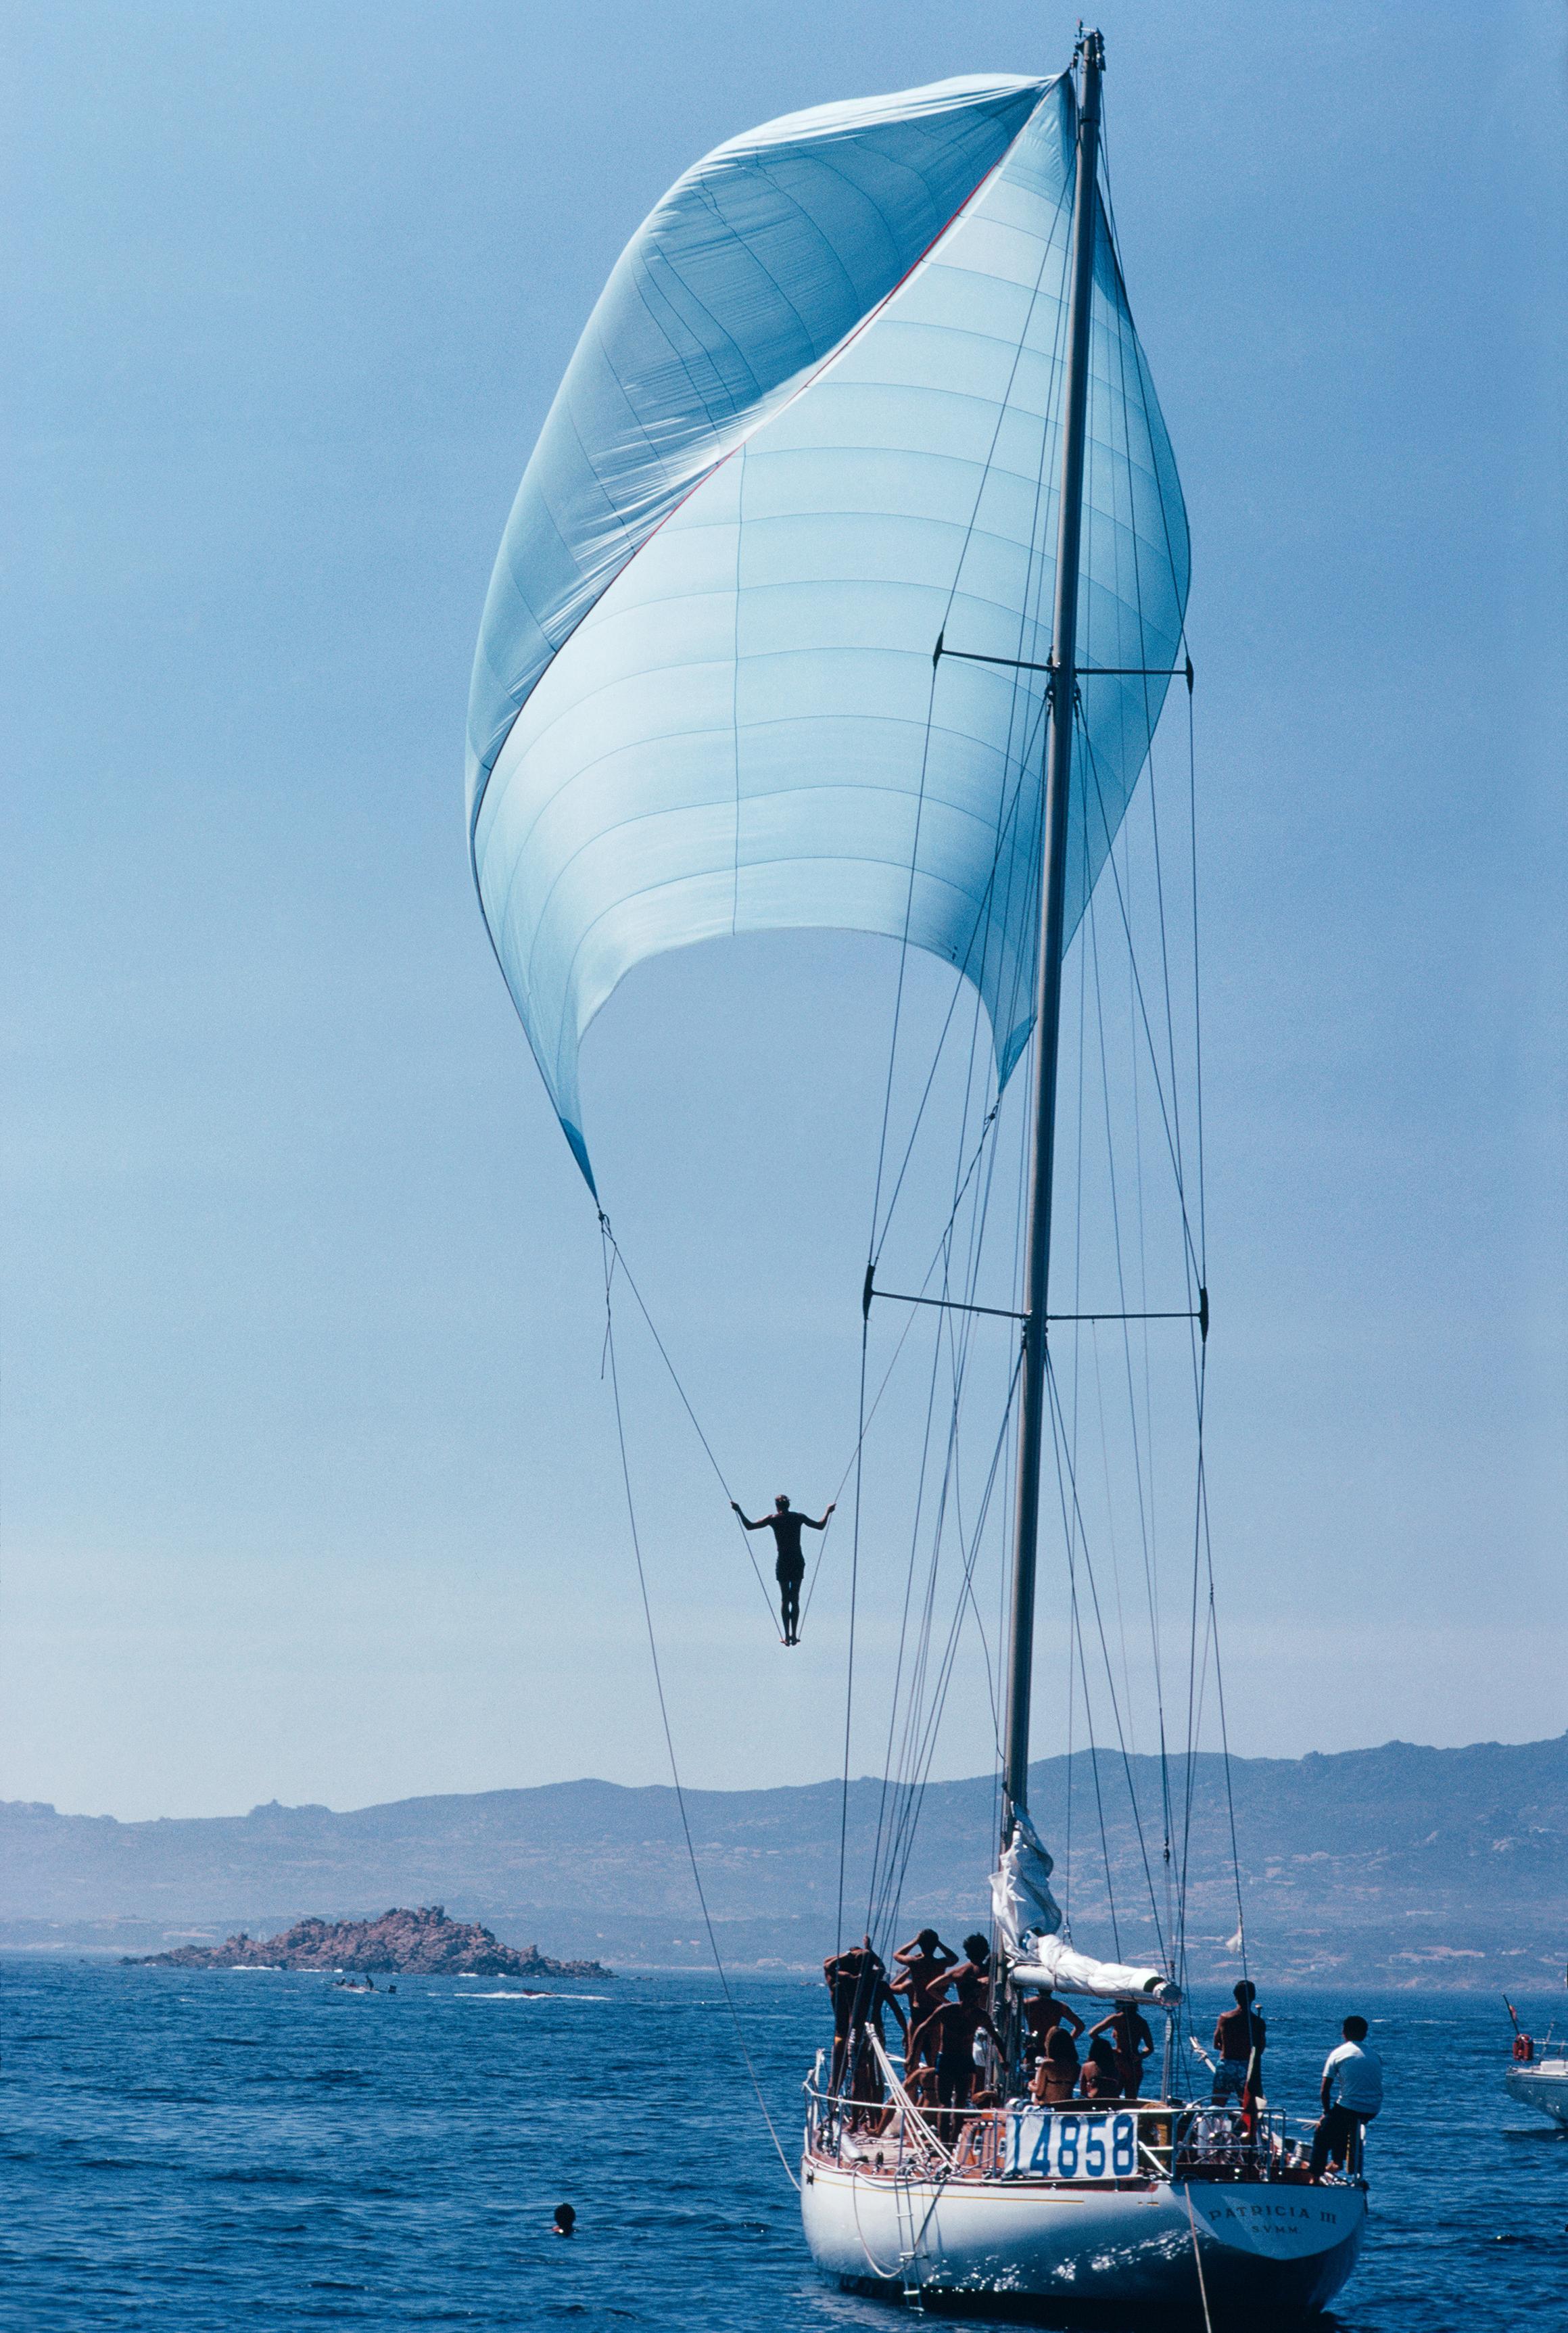 Slim Aarons Color Photograph - Spinnaker Sailing, Estate Edition)